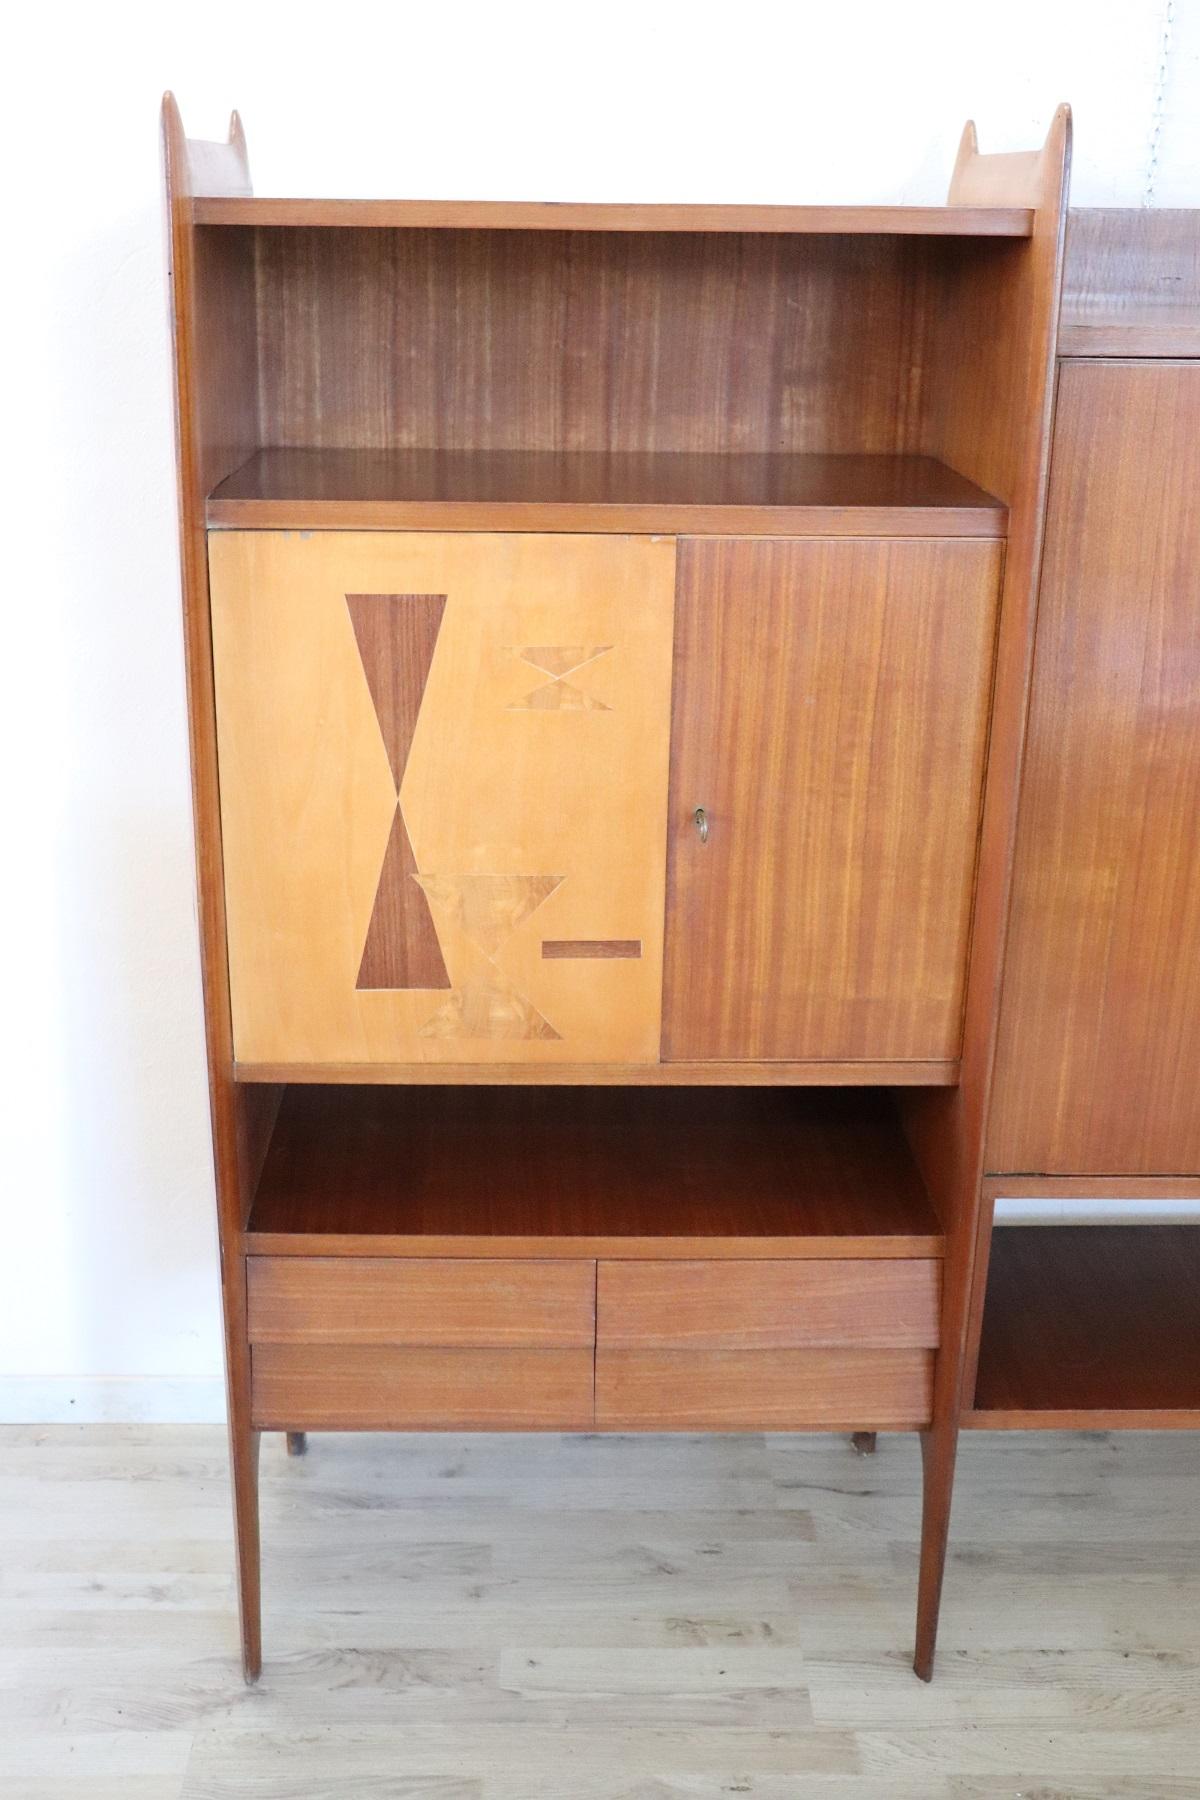 Italian design bookcase or cabinet 1960s high quality furniture. This Italian design furniture is made of teak wood and can be used in different ways. They can be practical bookcases or cabinets for the living room. The color contrast is very